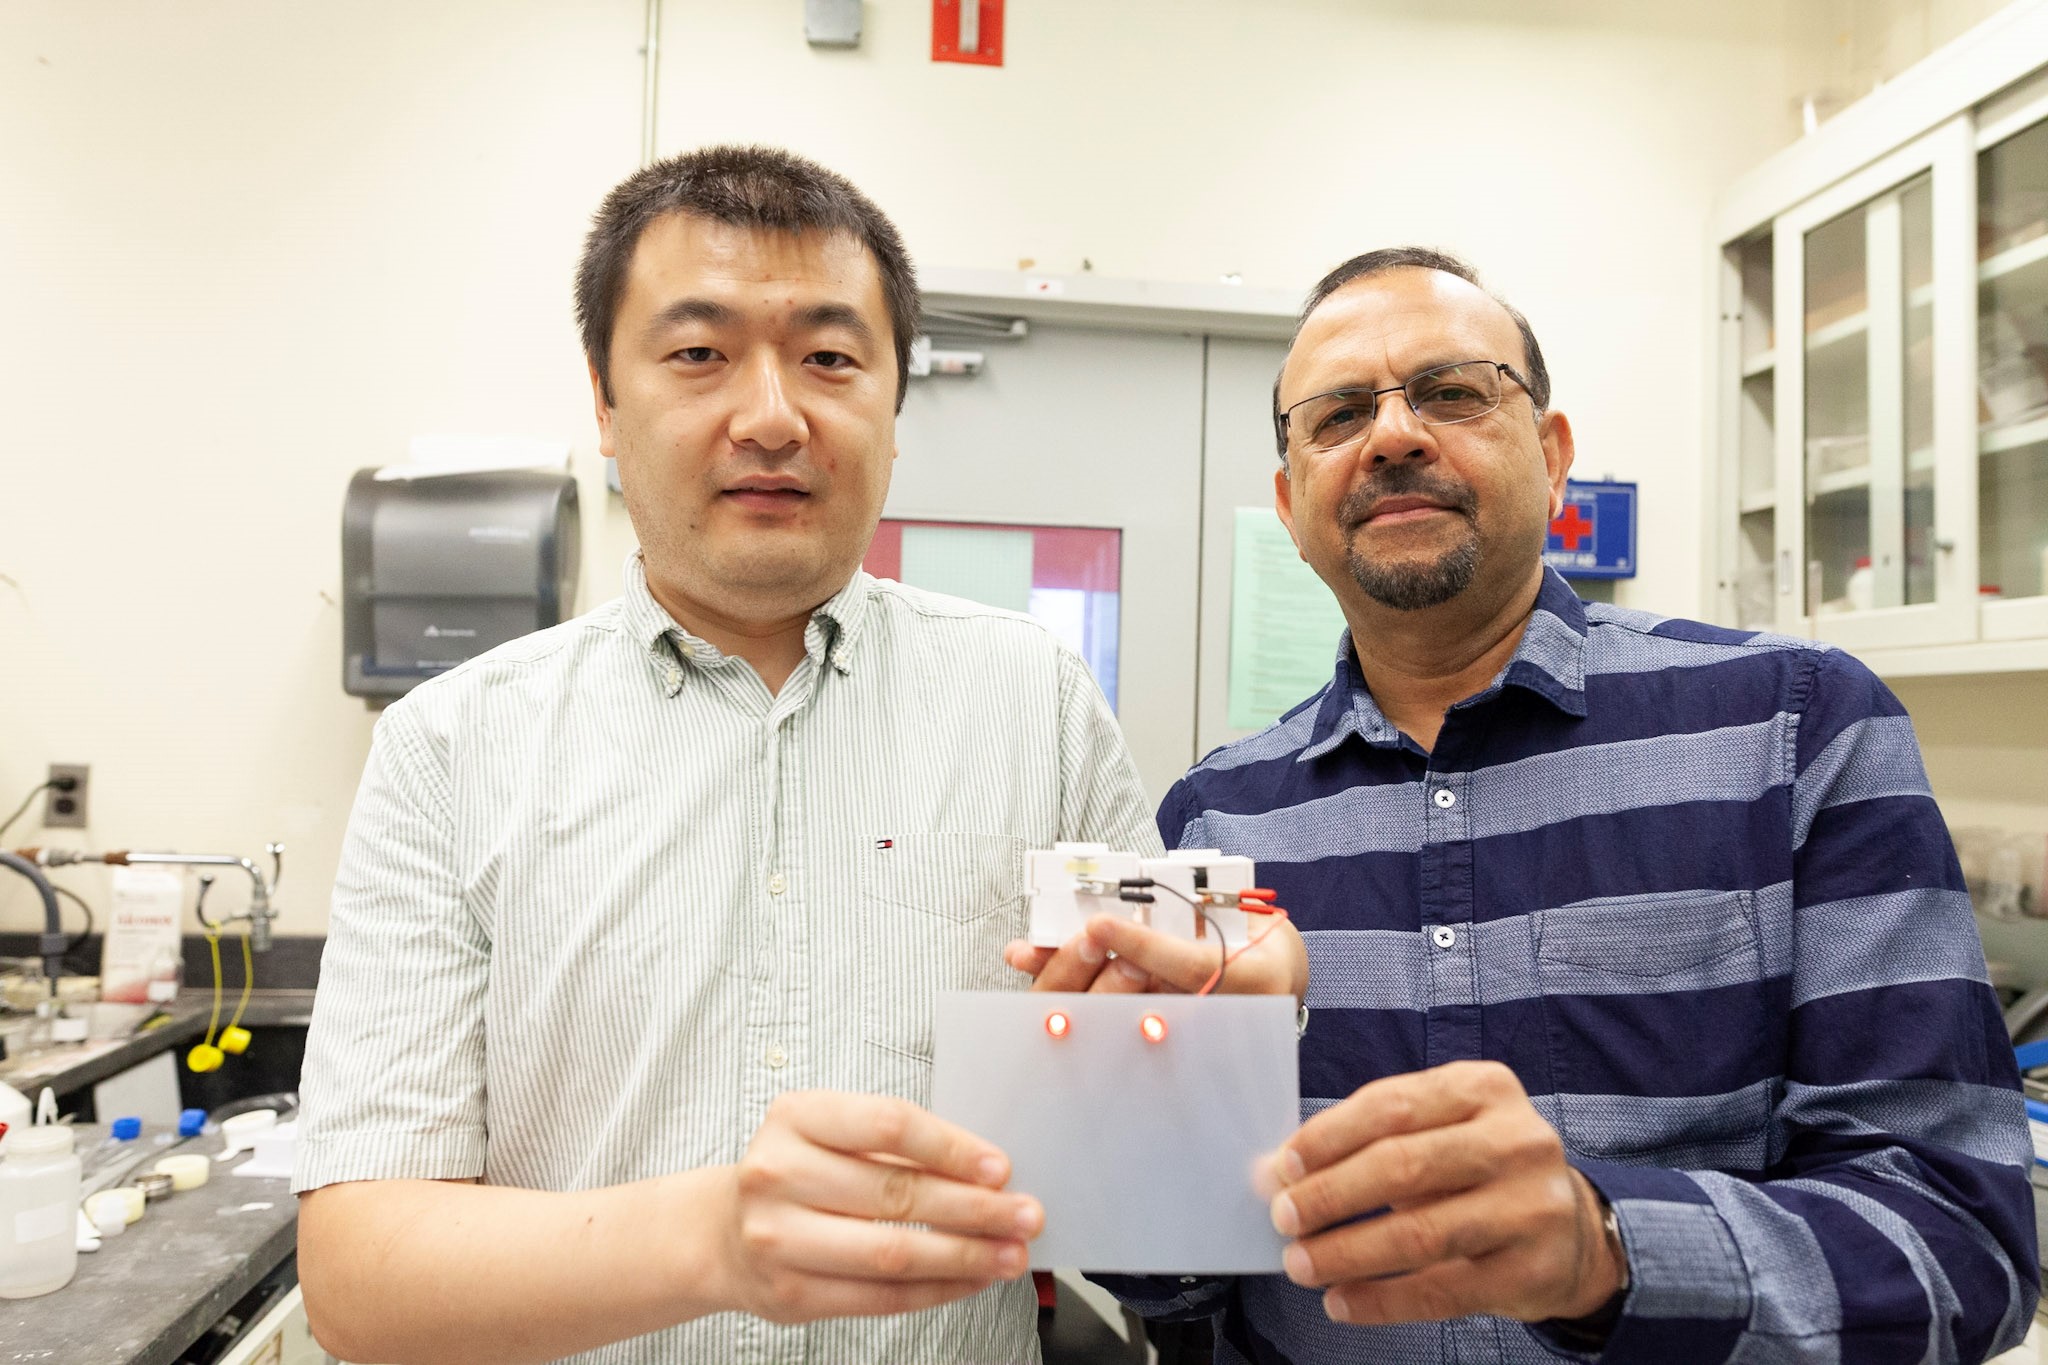 New Jersey Institute of Technology researchers Zhiqian Wang and Somenath Mitra have developed high-capacity, printable-on-demand batteries for everyday appliances that are designed to last nearly three times as long as those currently on store shelves.